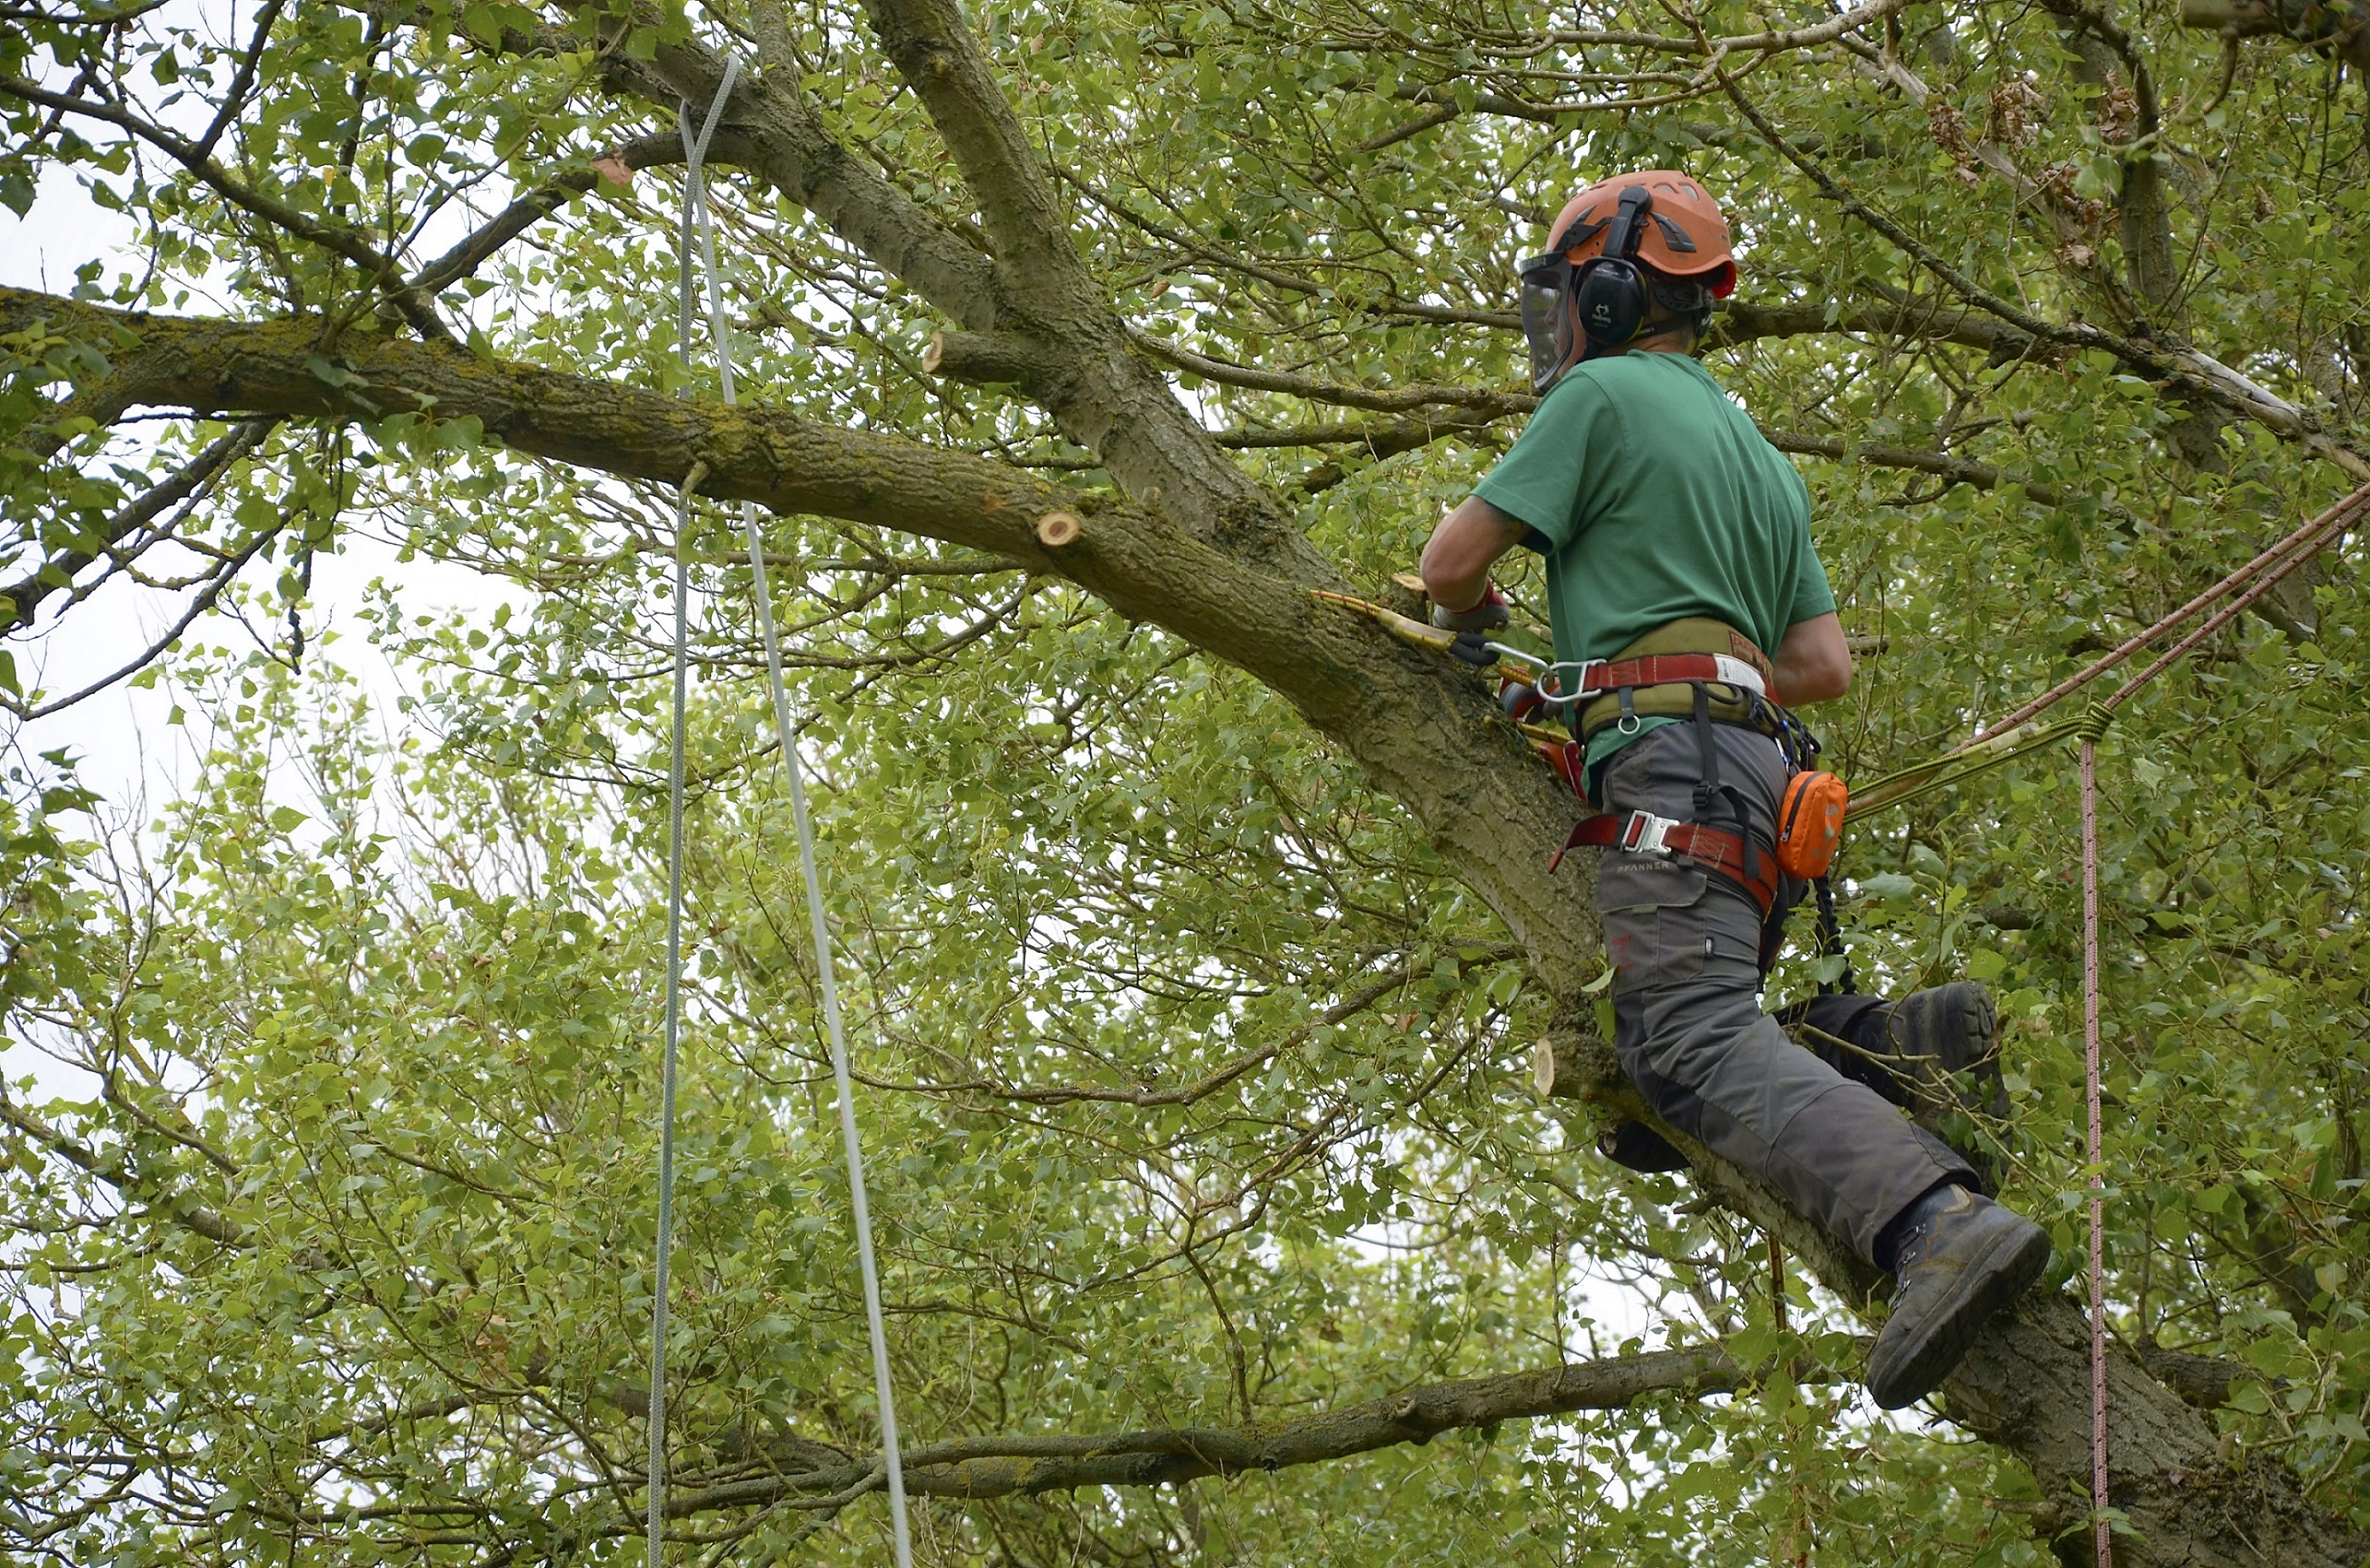 An arboricultural apprentice undertakes some routine pruning